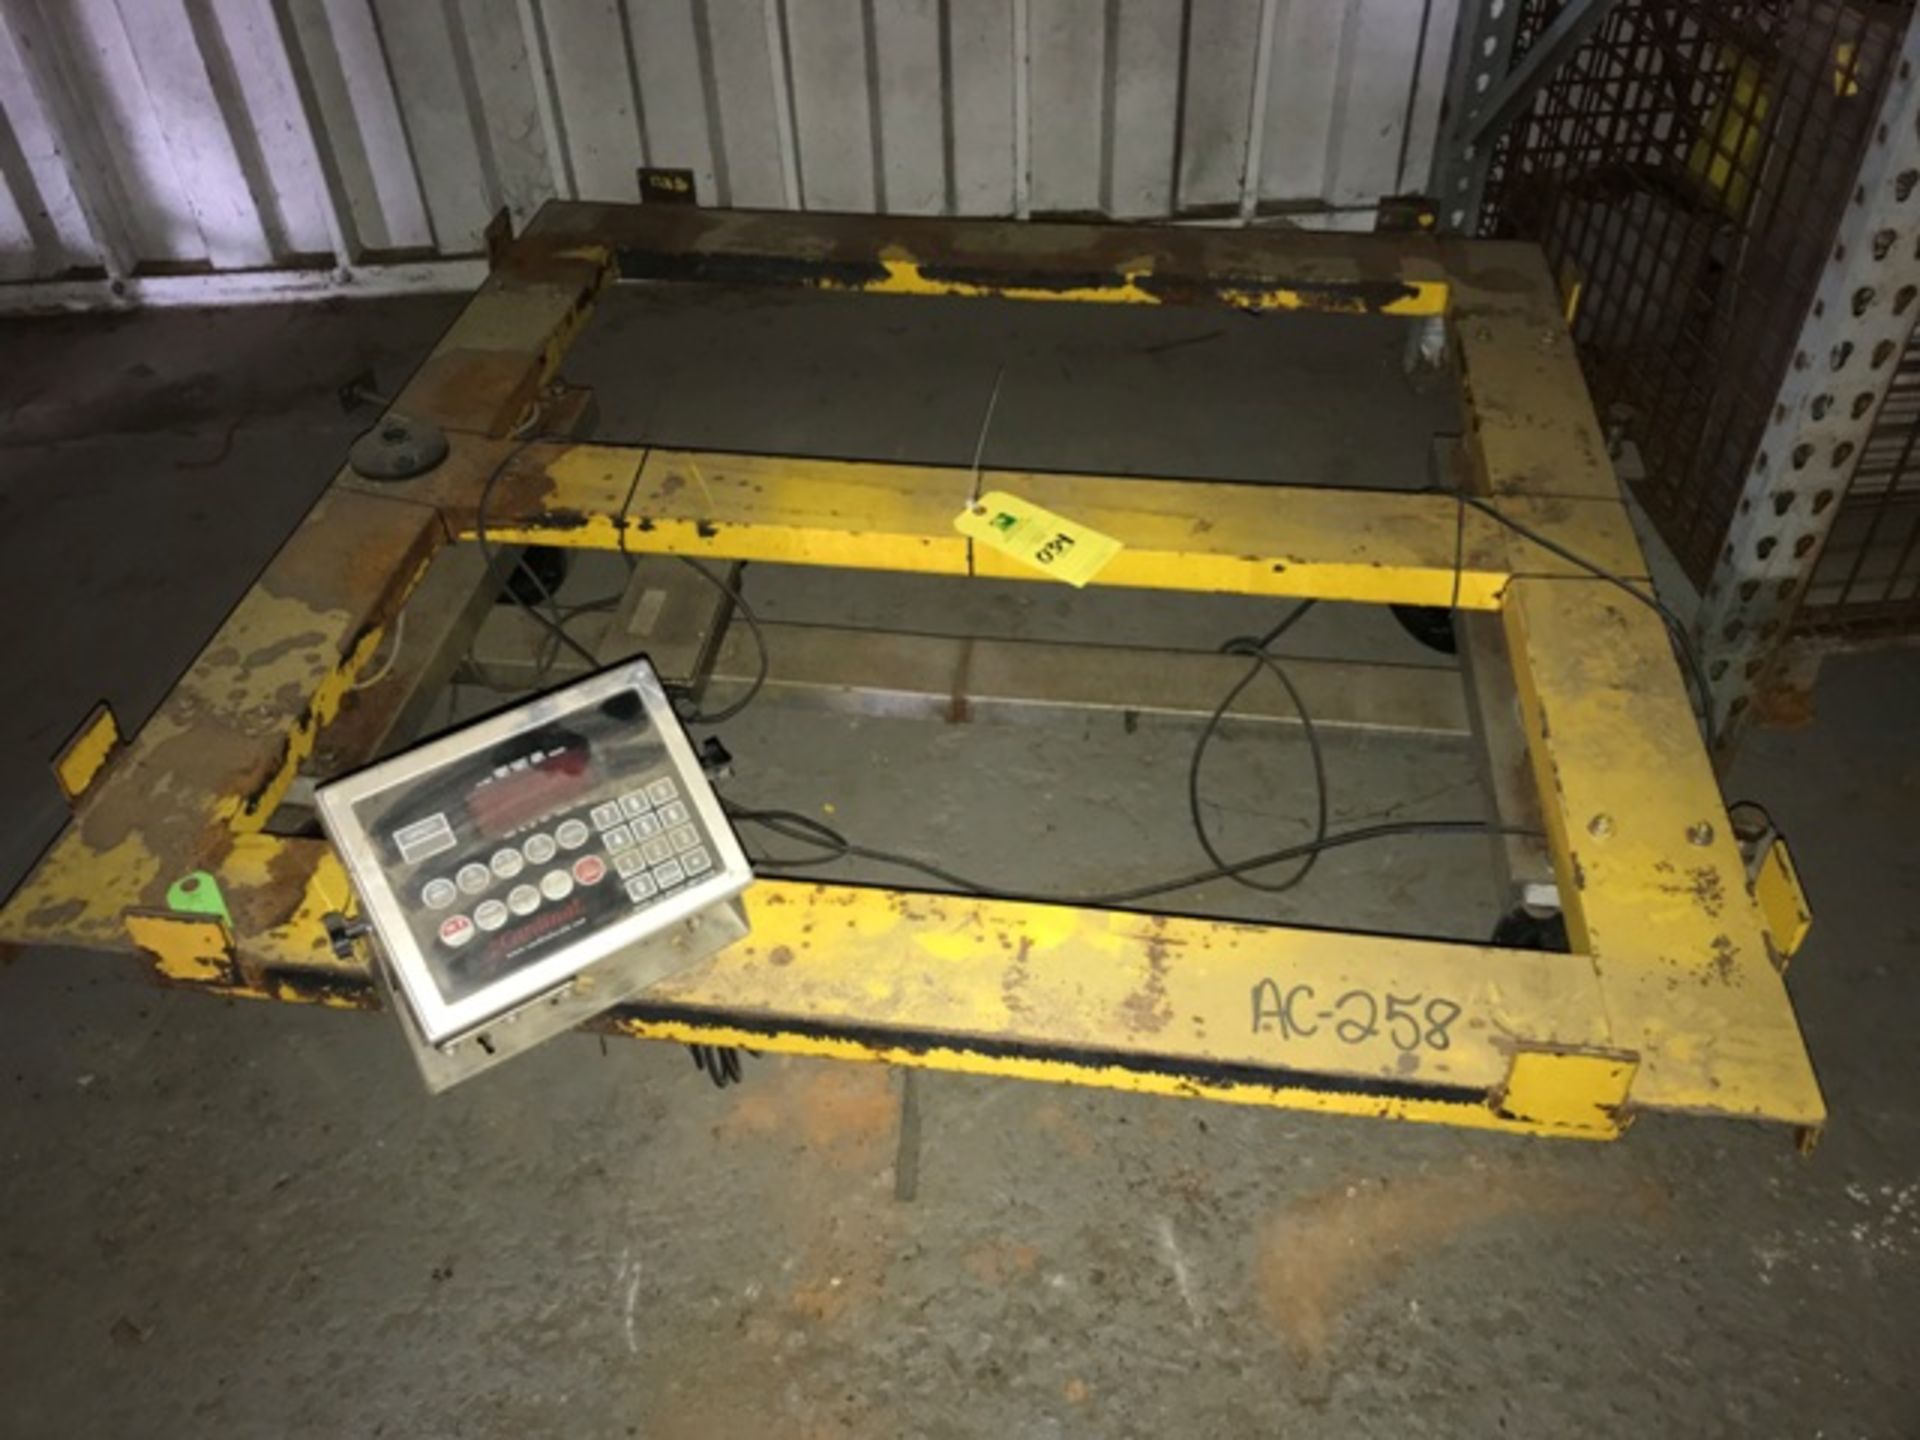 PORTABLE SCALE BASE ON CASTERS. FOR CONTAINMENT BASIN. 51.75”ID X 51.75”ID. 4EA. LOAD CELLS W/